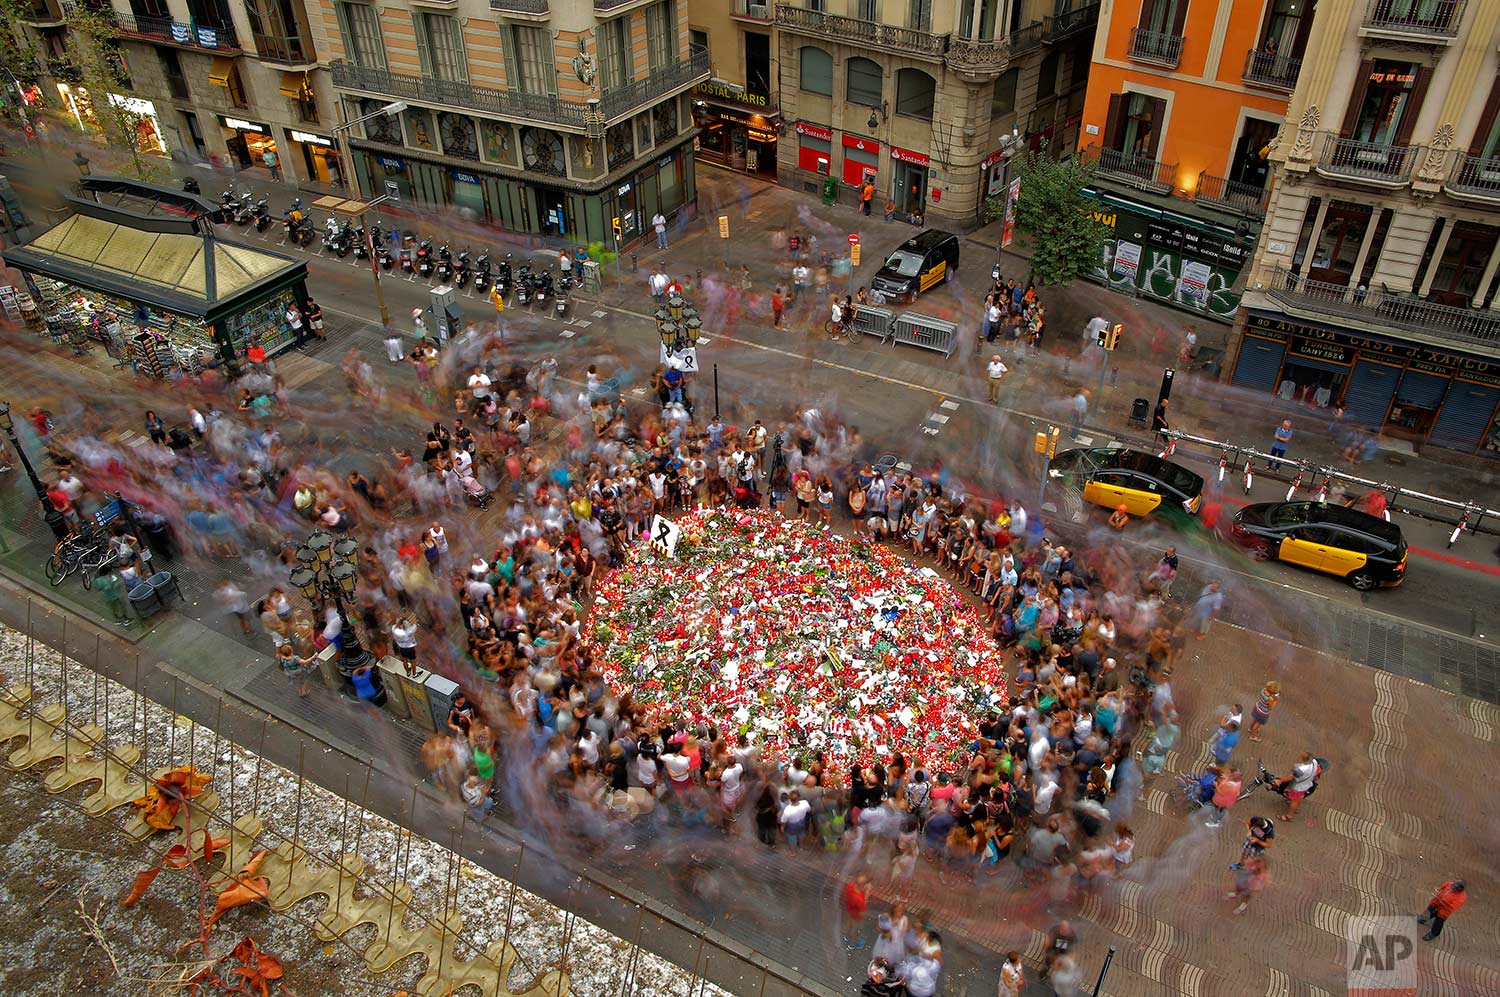  In this Saturday, Aug. 19, 2017 photo, people pay respect at a memorial tribute of flowers, messages and candles to the victims on Barcelona's historic Las Ramblas promenade on the Joan Miro mosaic, embedded in the pavement where the van stopped aft